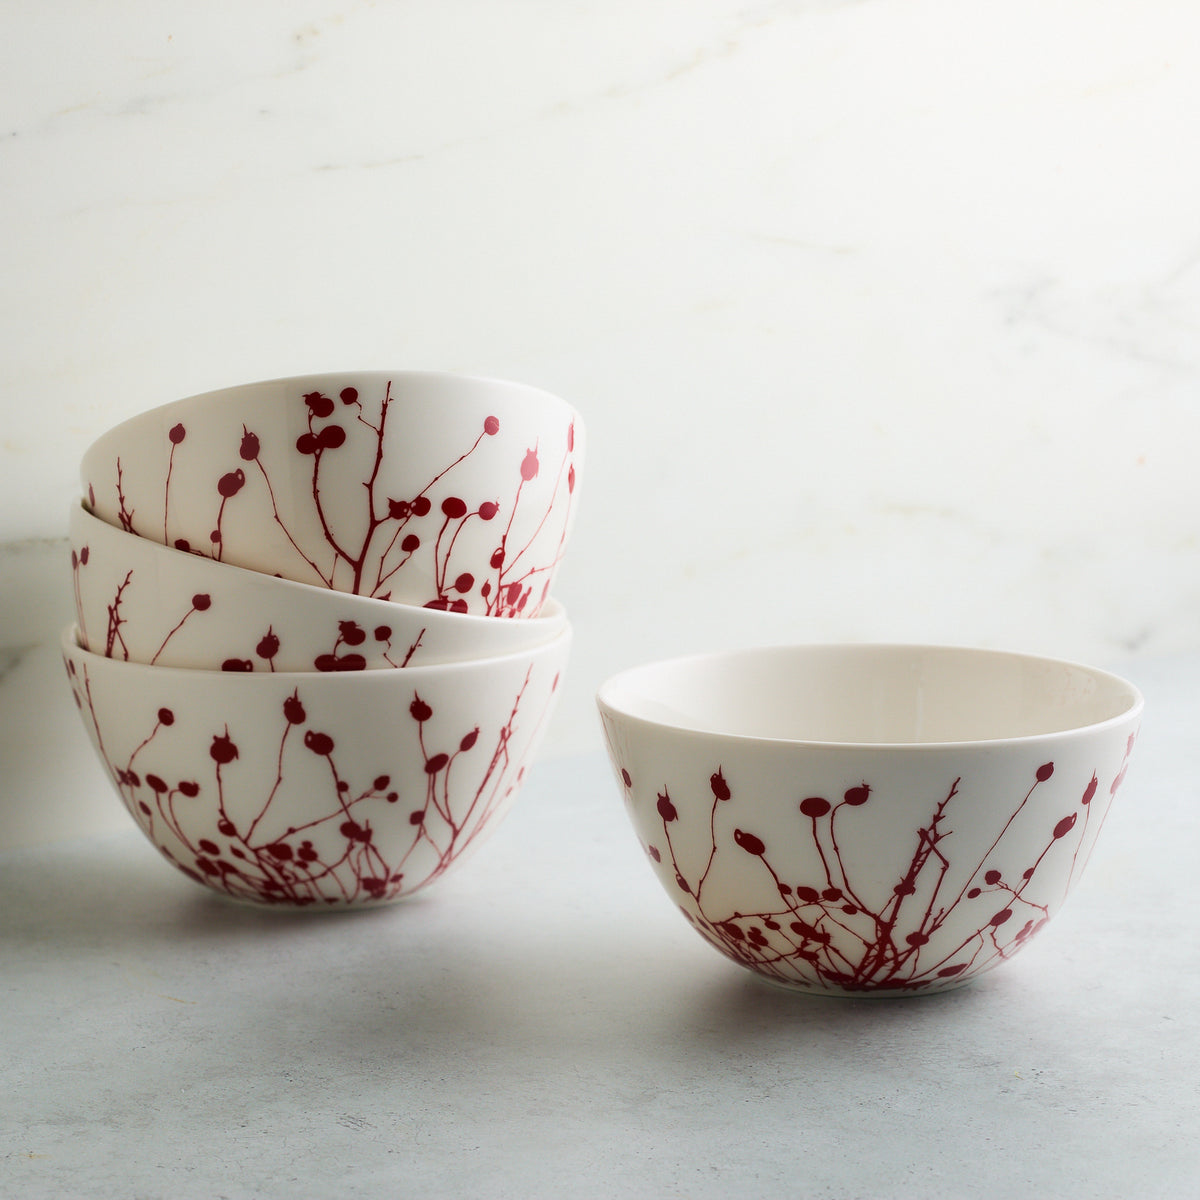 Four Winterberries Cereal Bowls by Caskata Artisanal Home, adorned with red floral patterns reminiscent of winter berries, are arranged on a light grey surface against a white background. Three bowls are stacked neatly on the left, while one stands alone on the right. These dishwasher-safe bowls add a touch of elegance to any table setting.